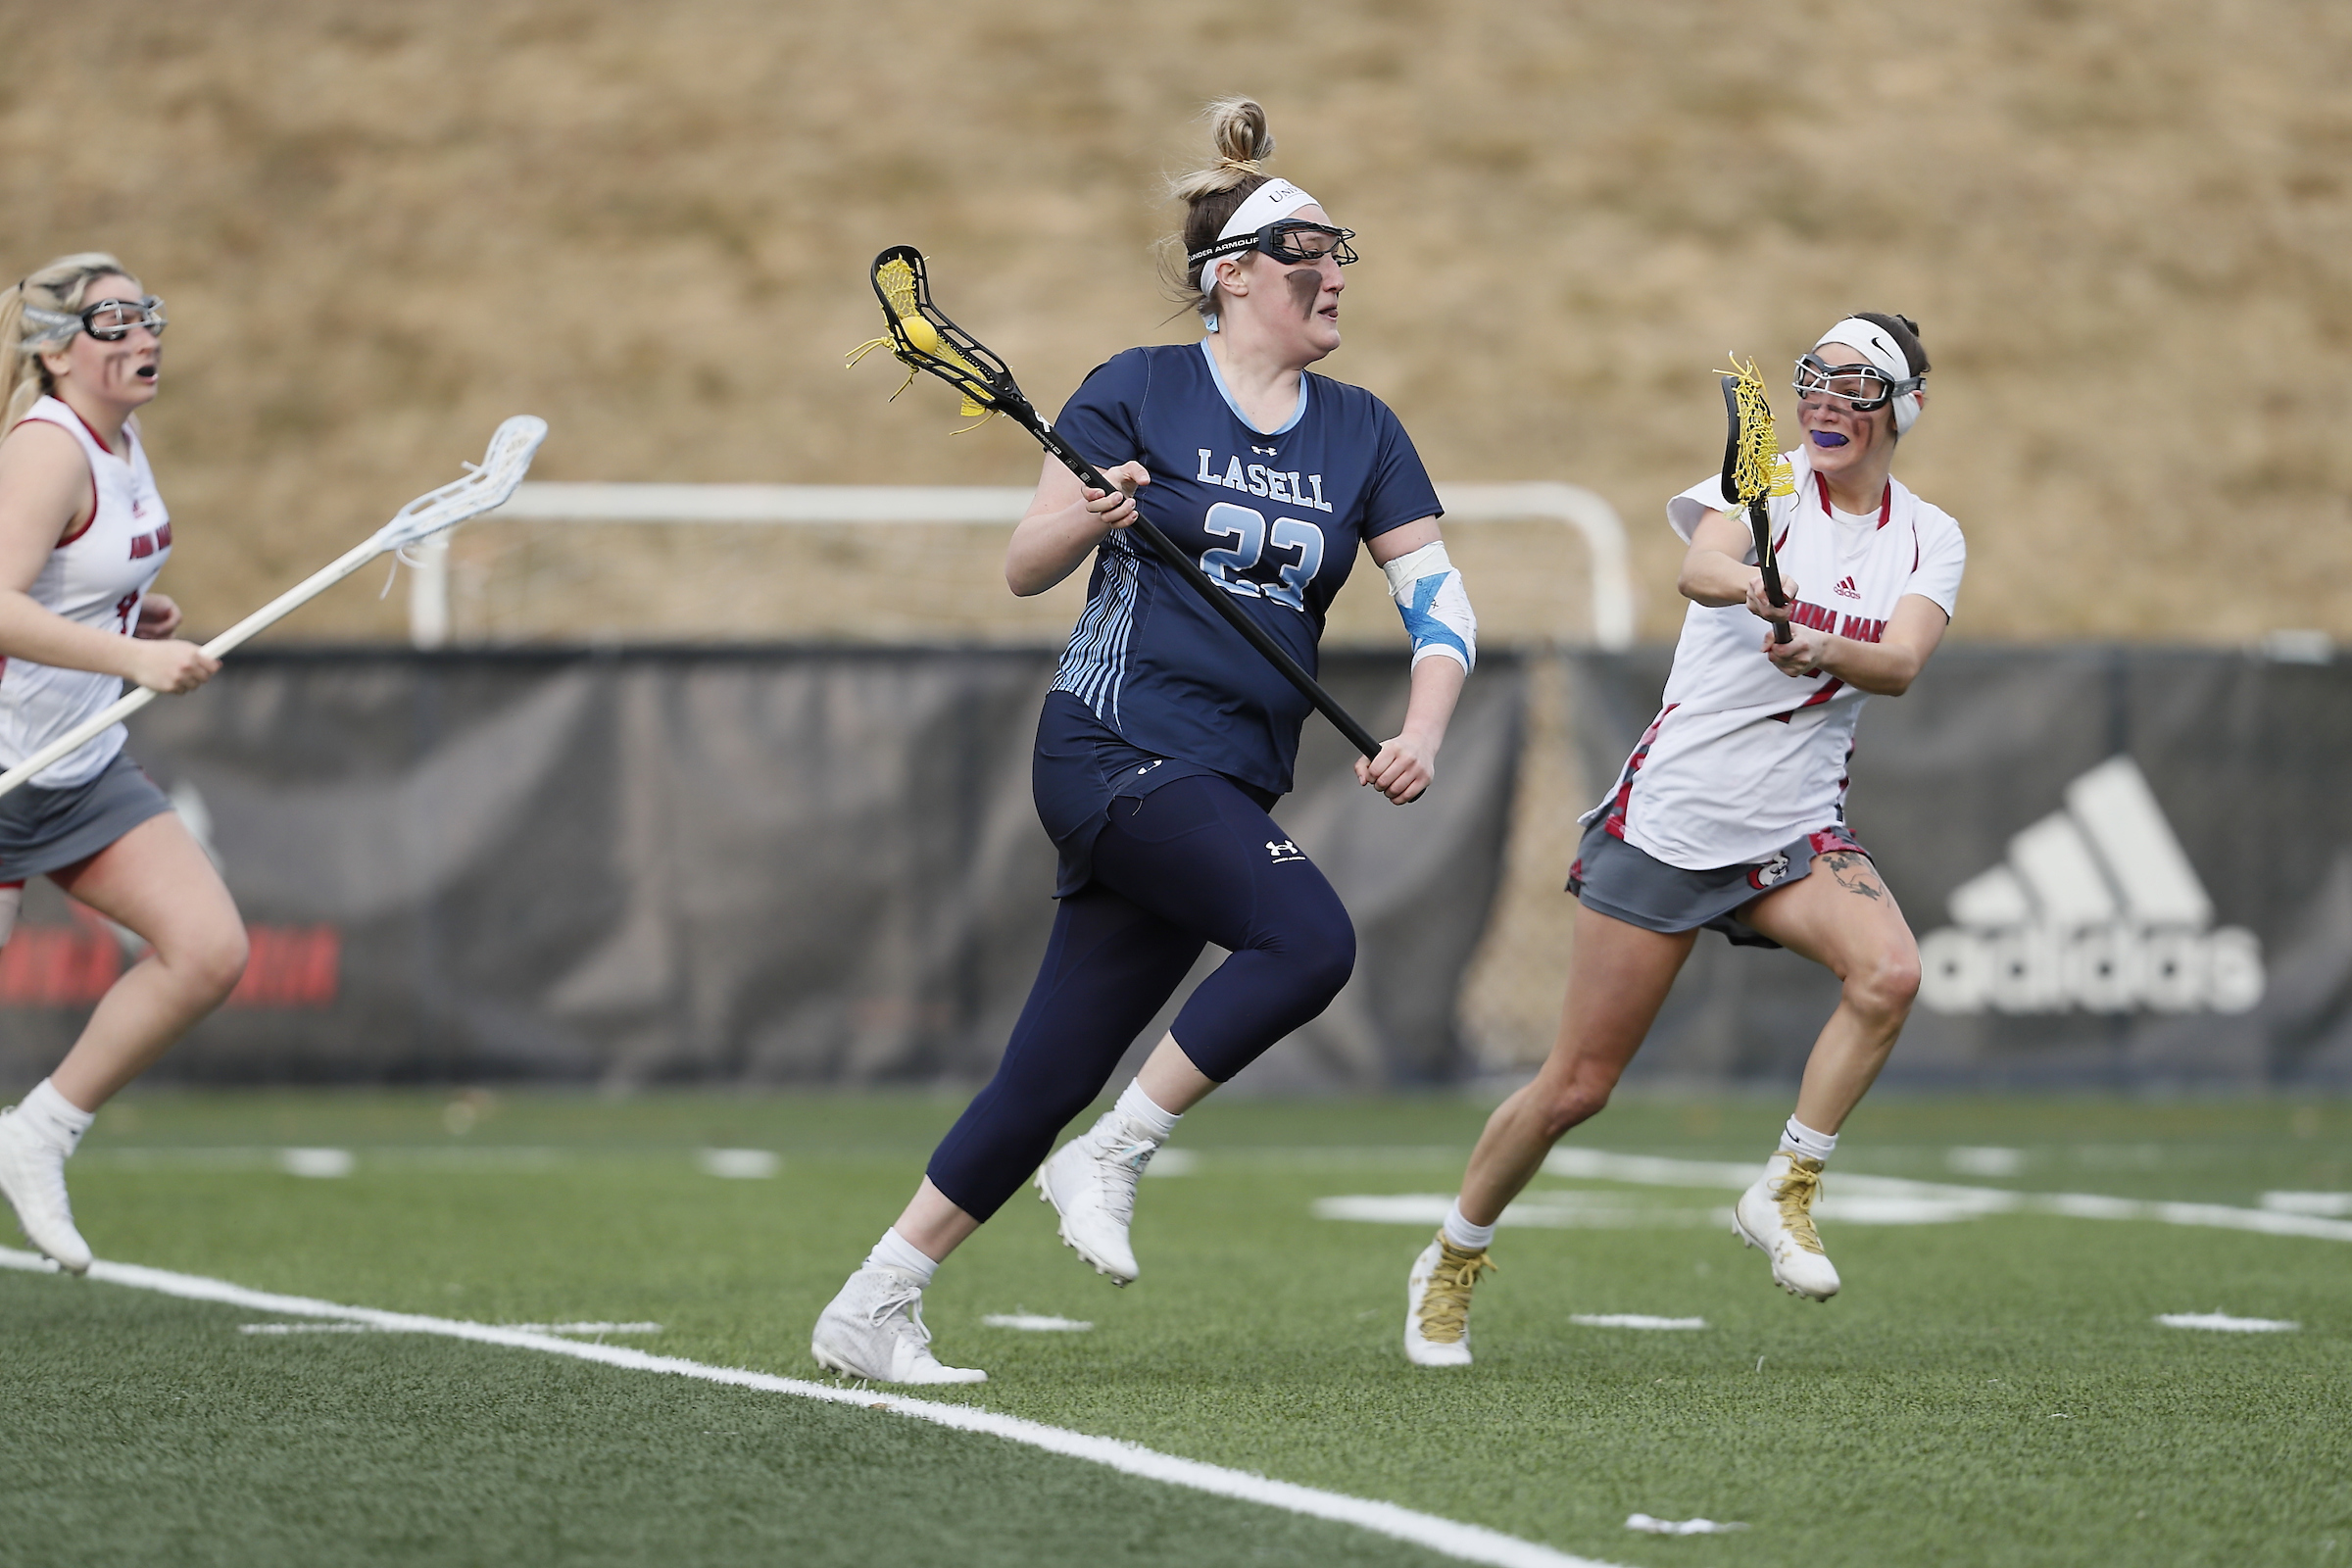 WLax: Kessner's Hat Trick Leads Lasers in Loss